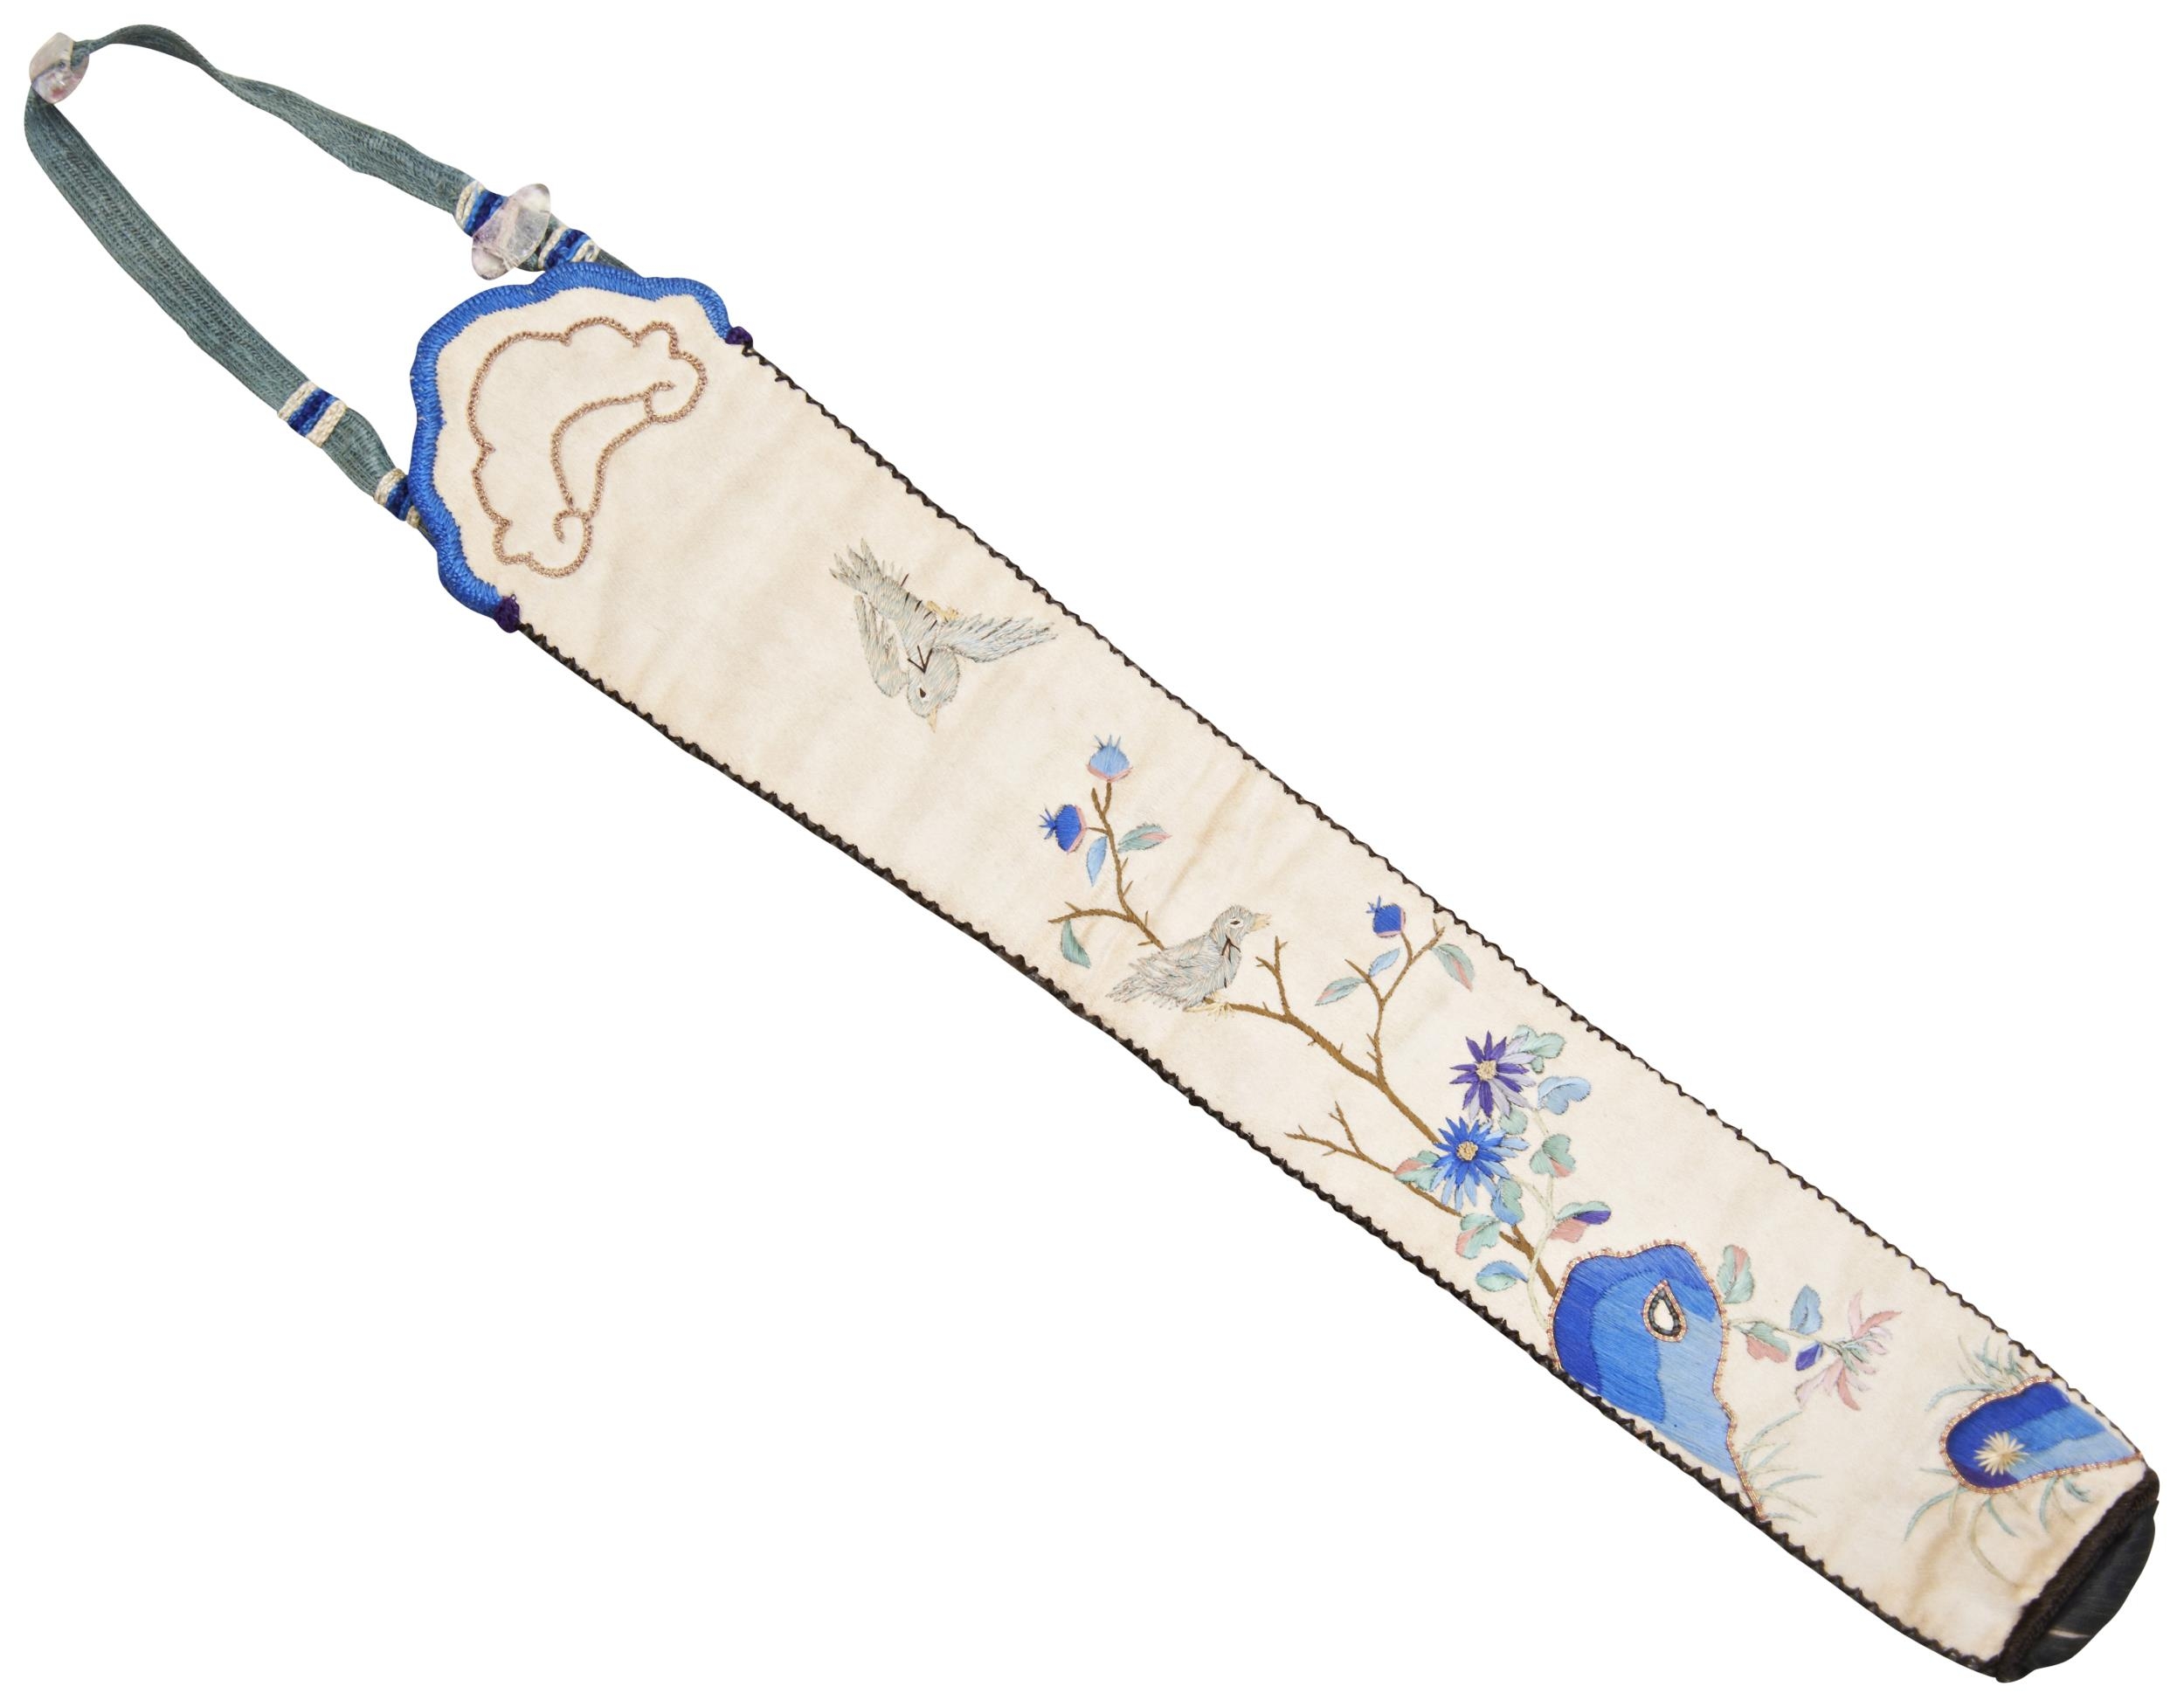 A CREAM EMBROIDERED SILK FAN CASE LATE QING DYNASTY 清 刺绣扇套一件 embroidered in twisted satin stitch